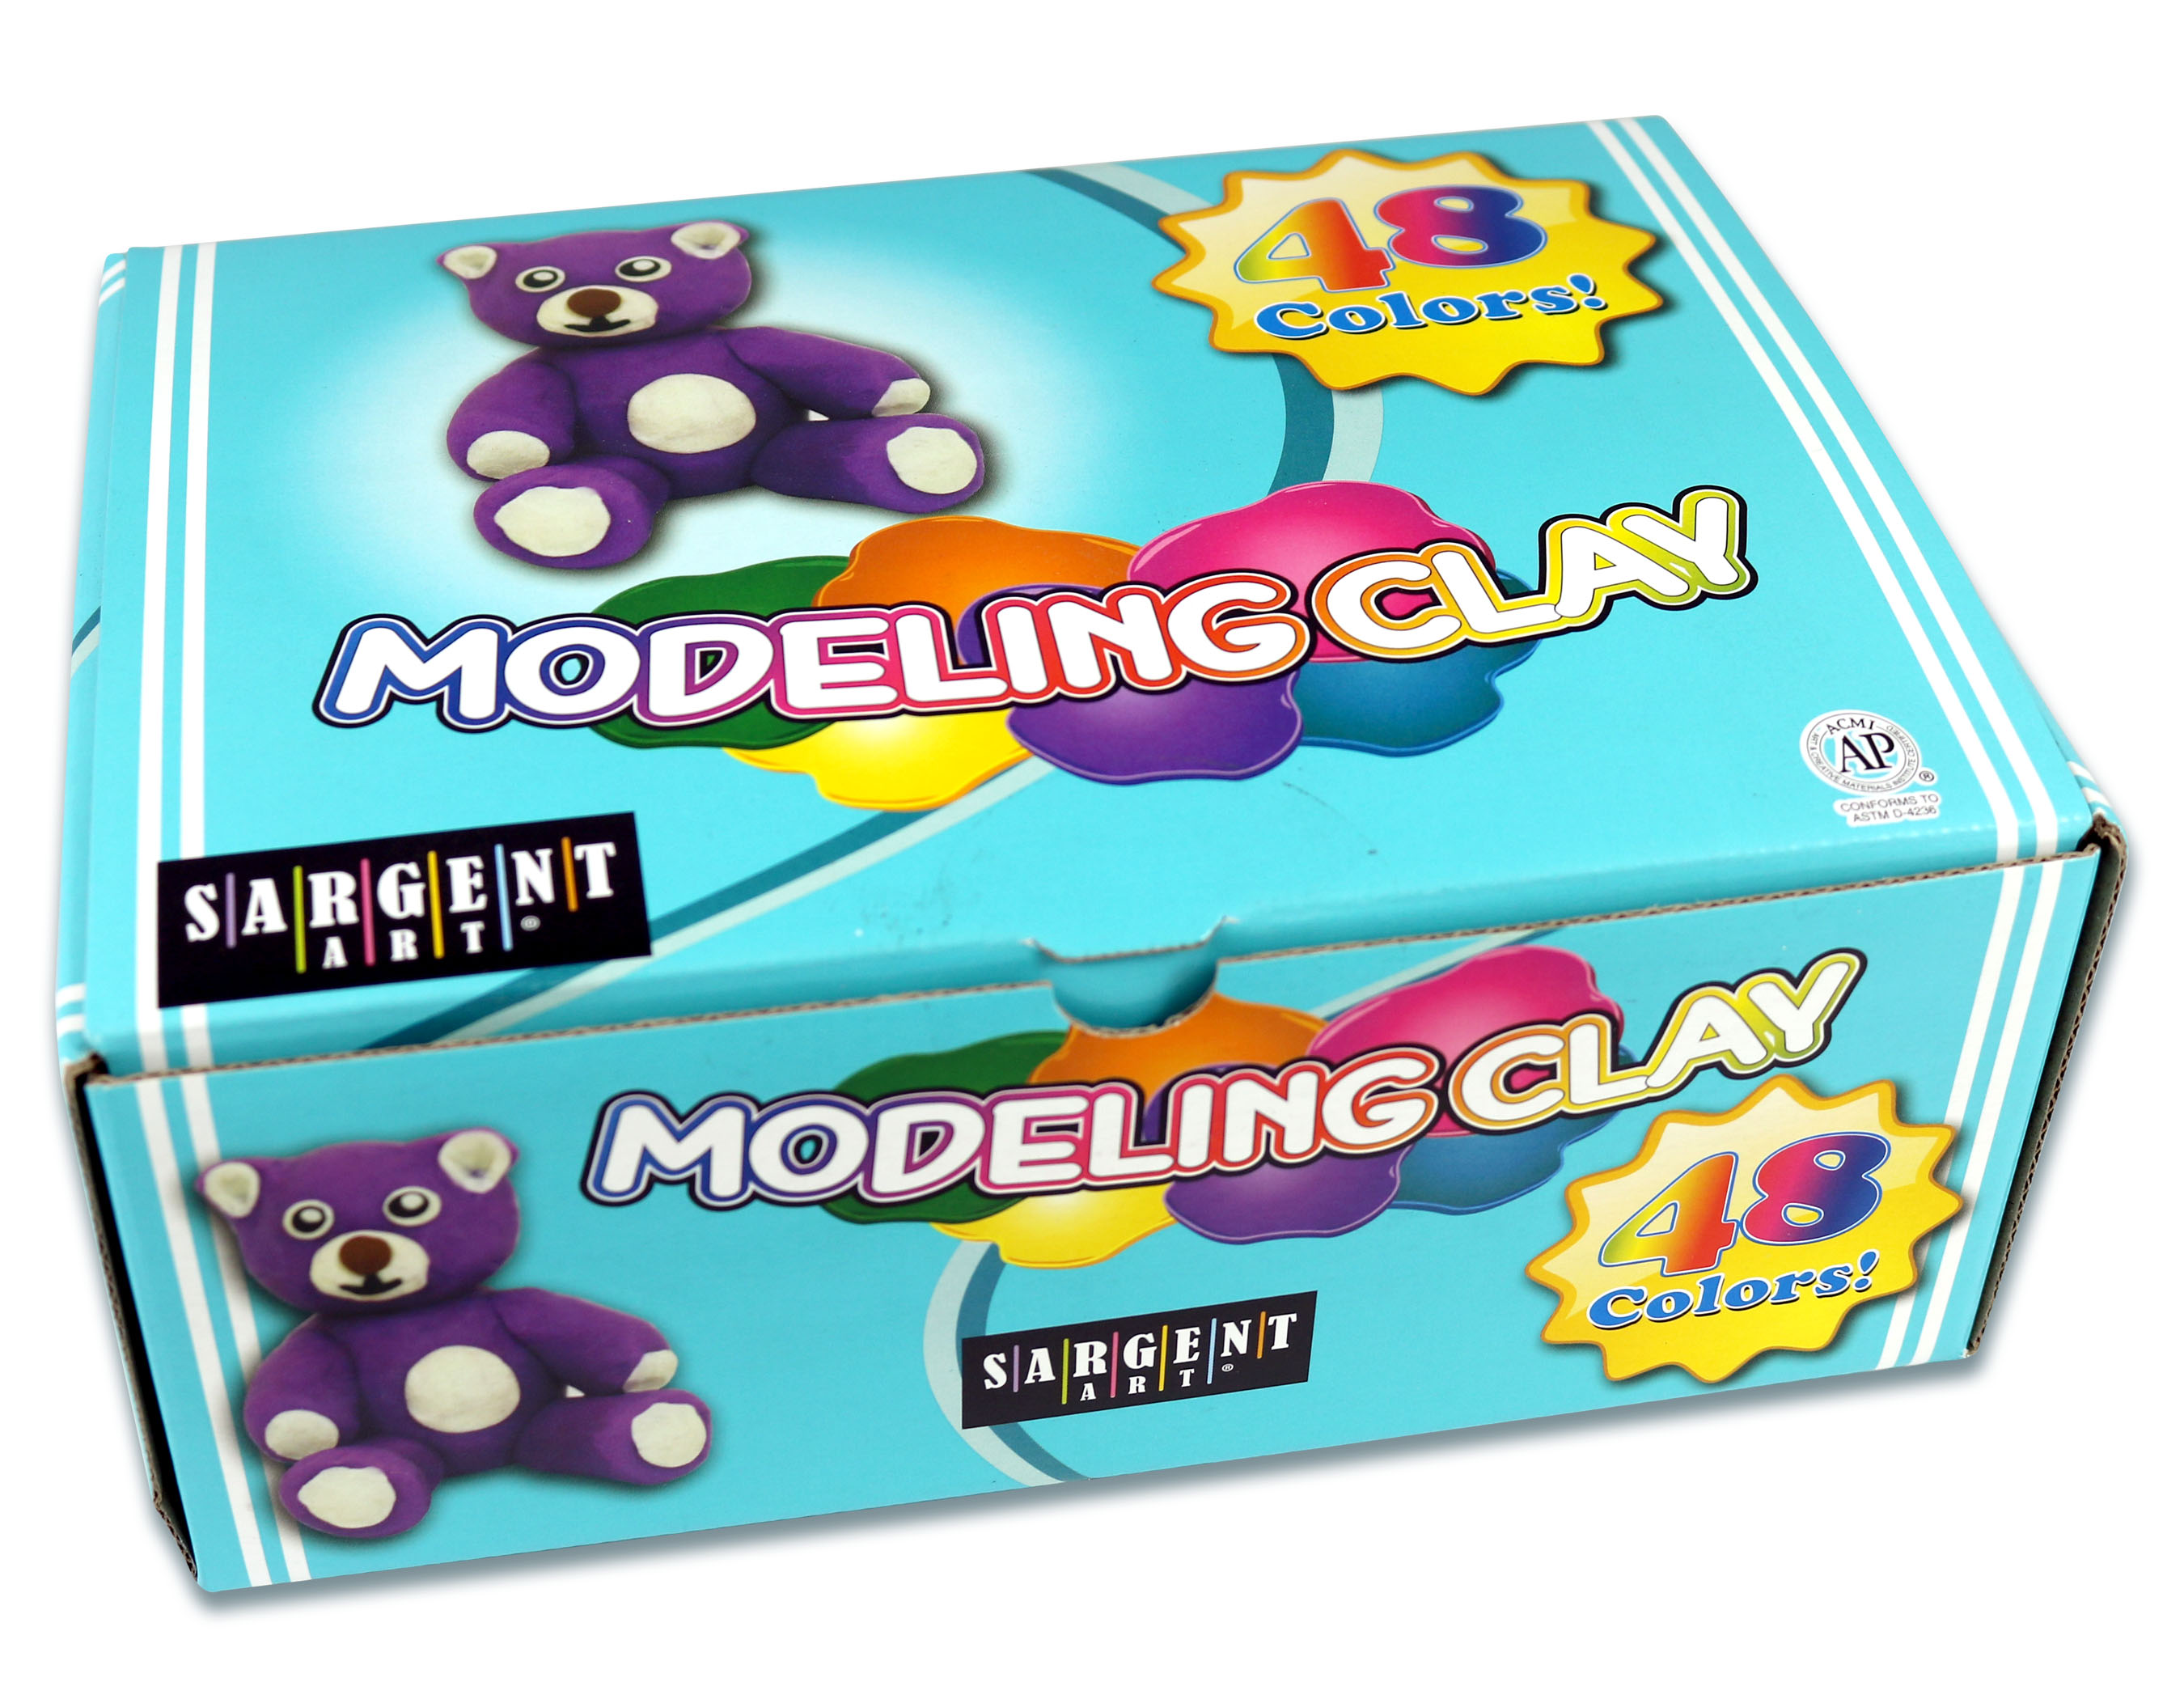 24 ct. Modeling Clay - Reusable Clay